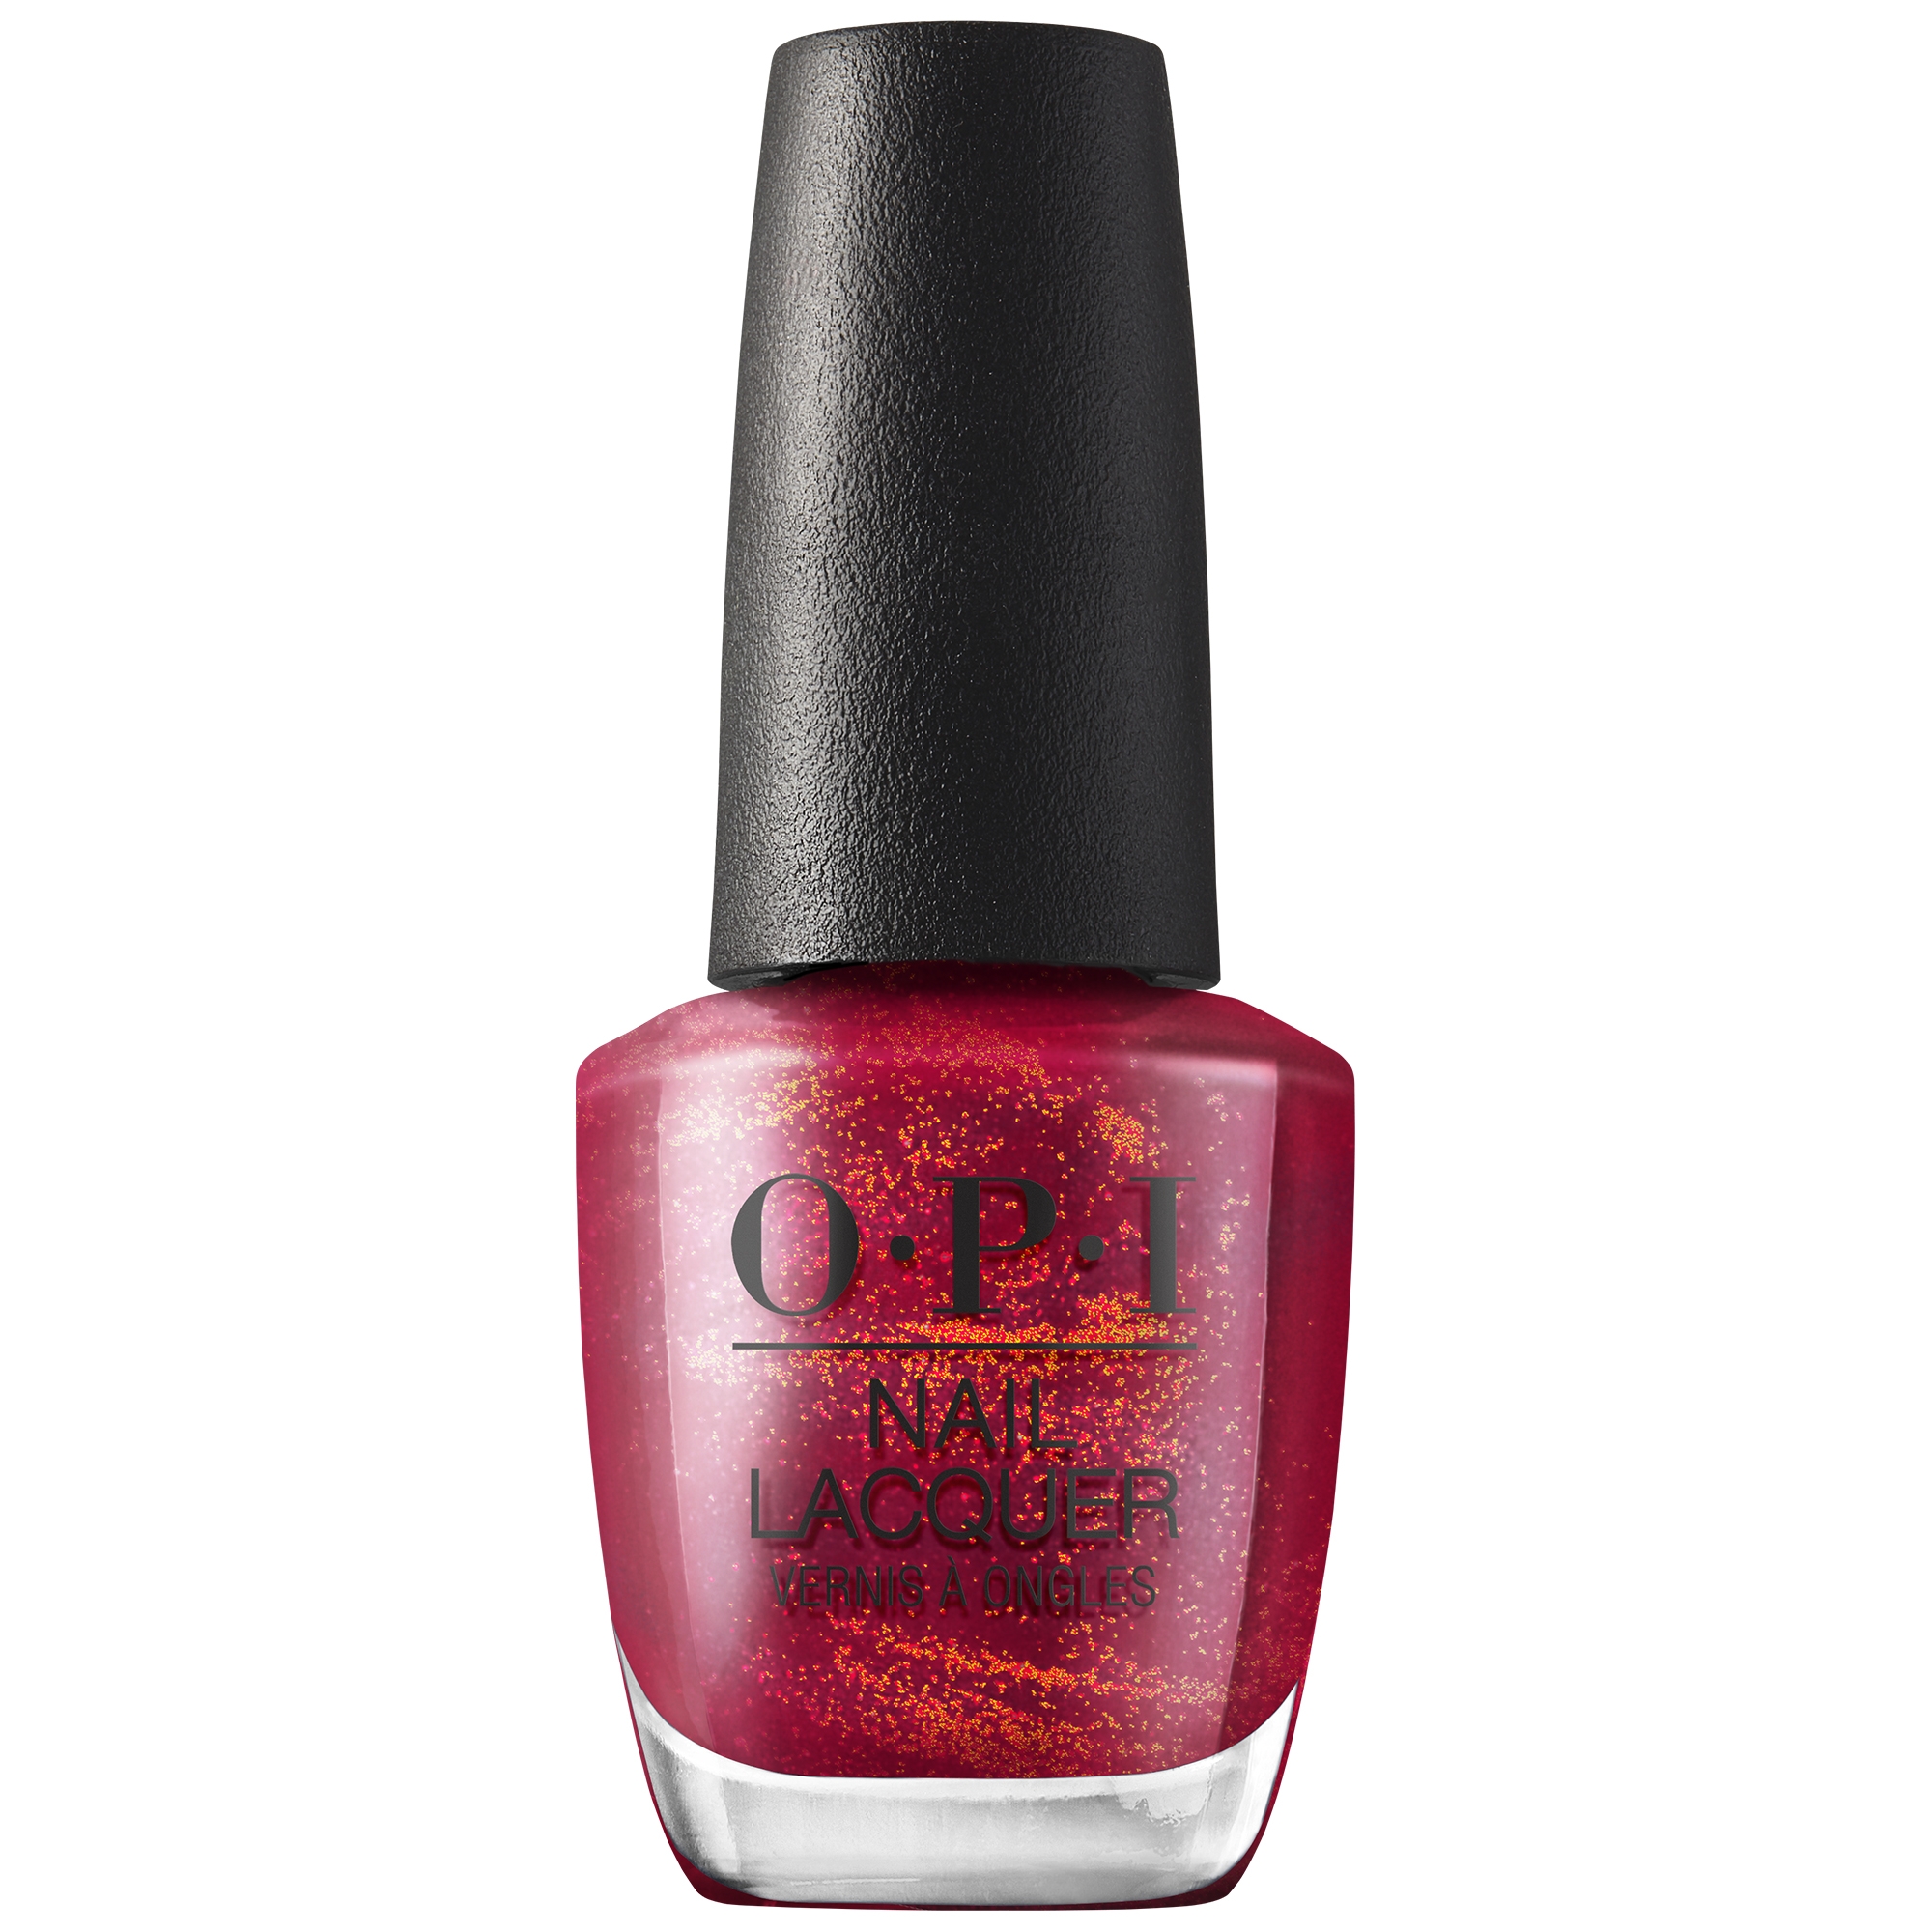 OPI Hollywood Collection: I'm Really an Actress 0.5oz